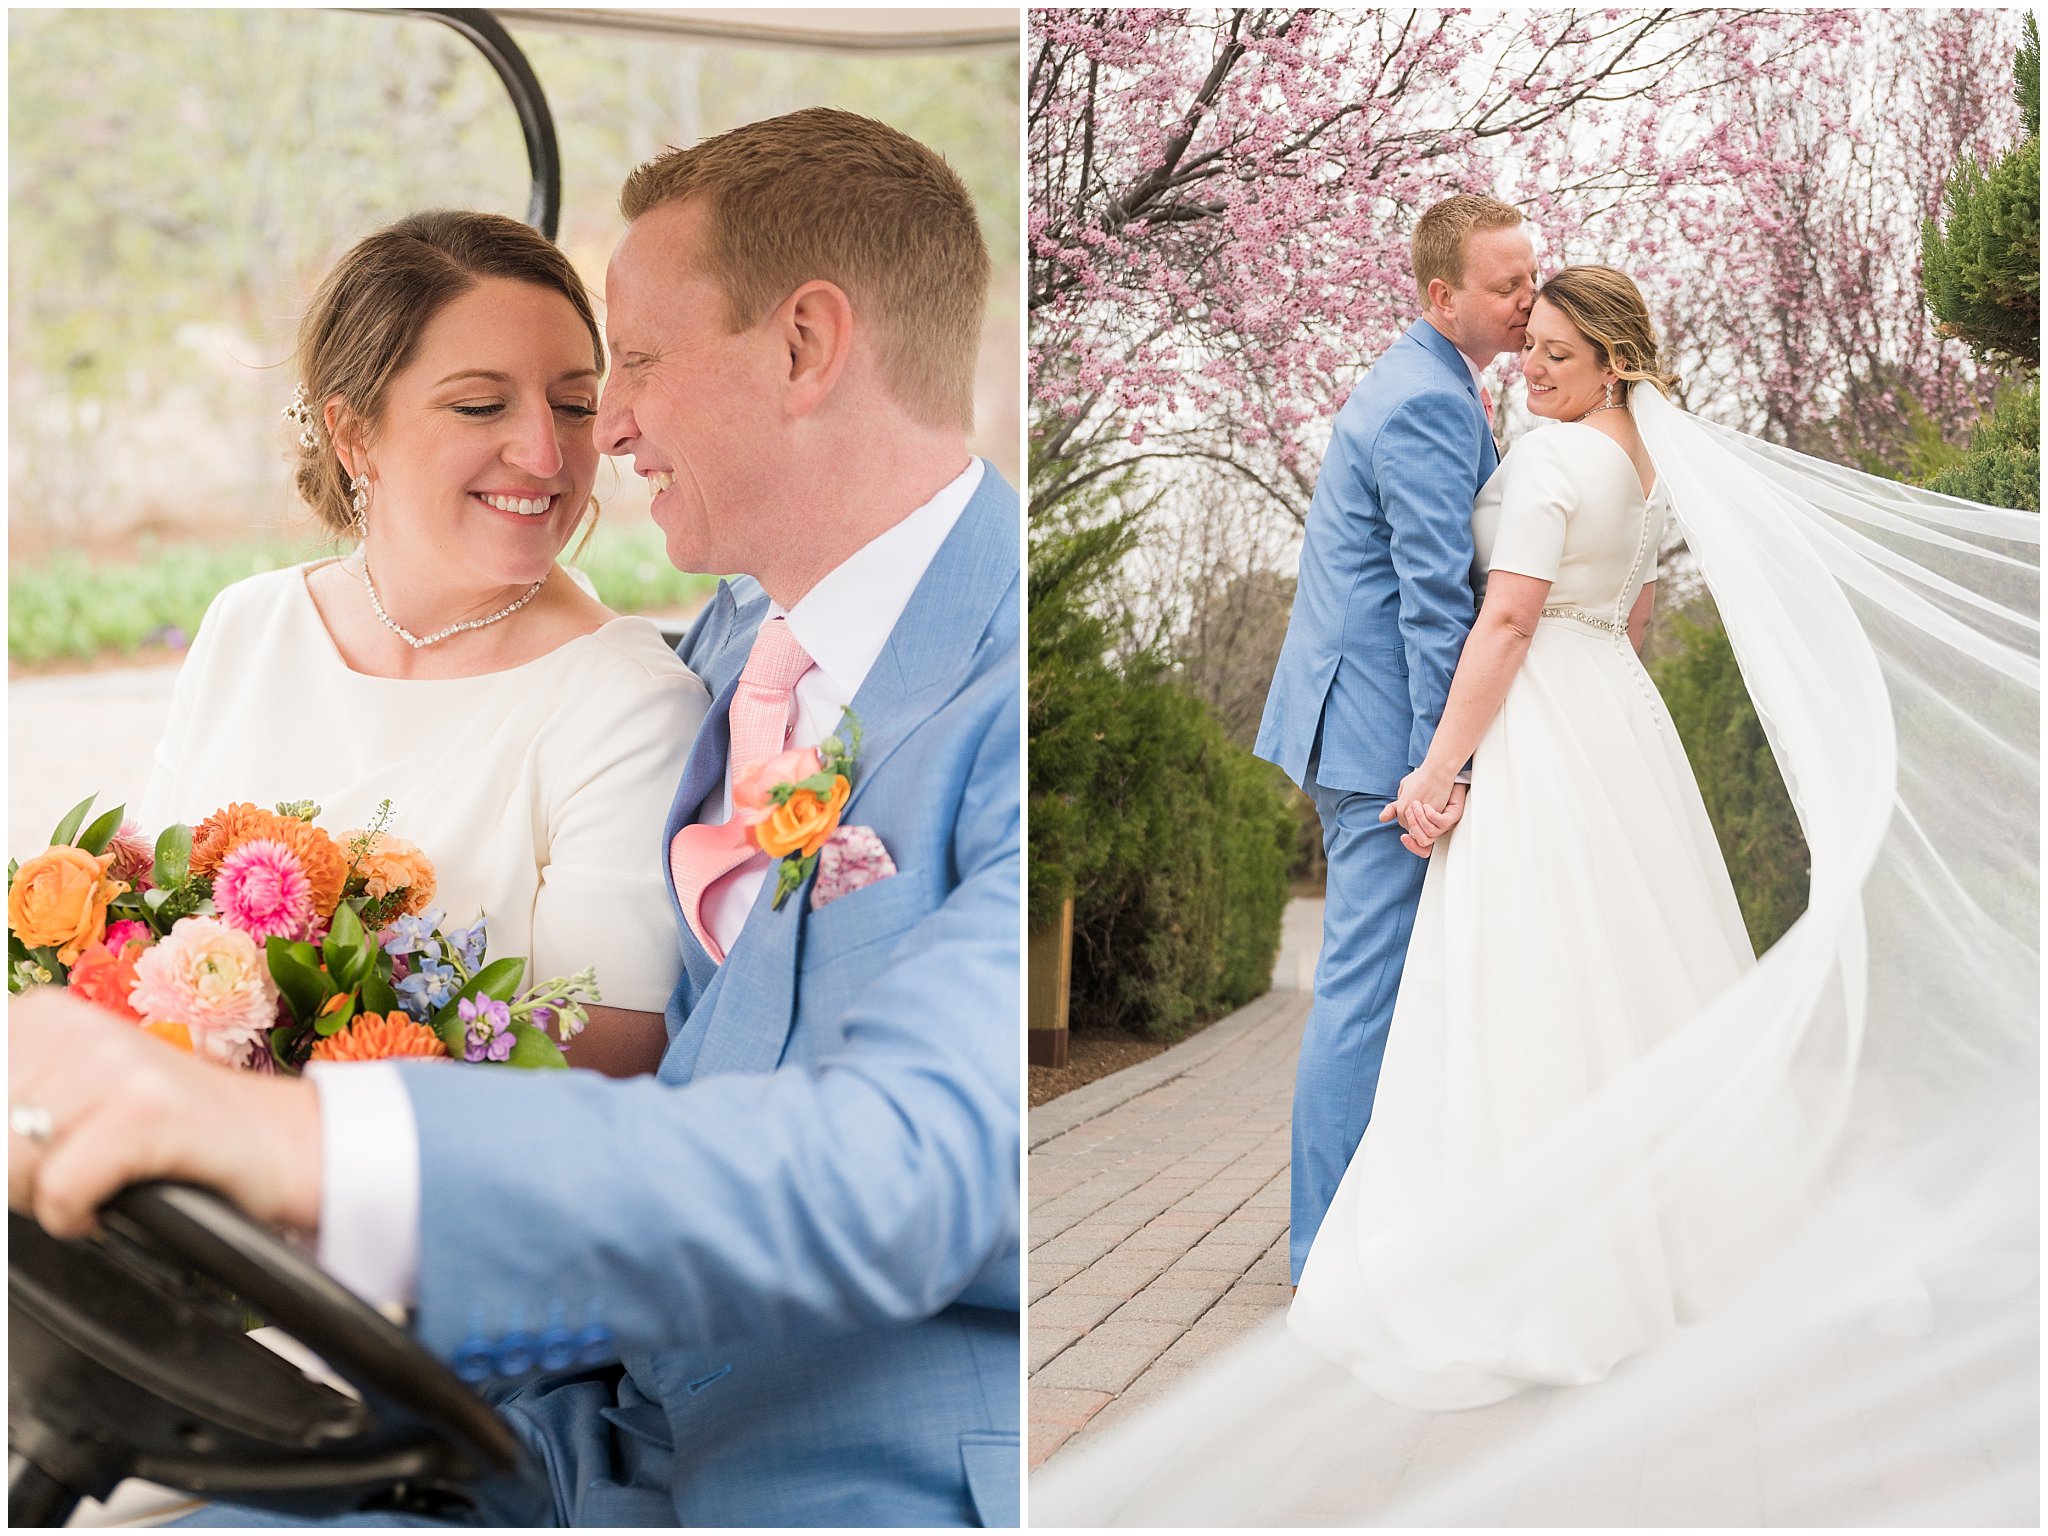 Bride and groom portraits with the tulips in the gardens at Thanksgiving Point | Thanksgiving Point Rainy Spring Formal Session | Jessie and Dallin Photography